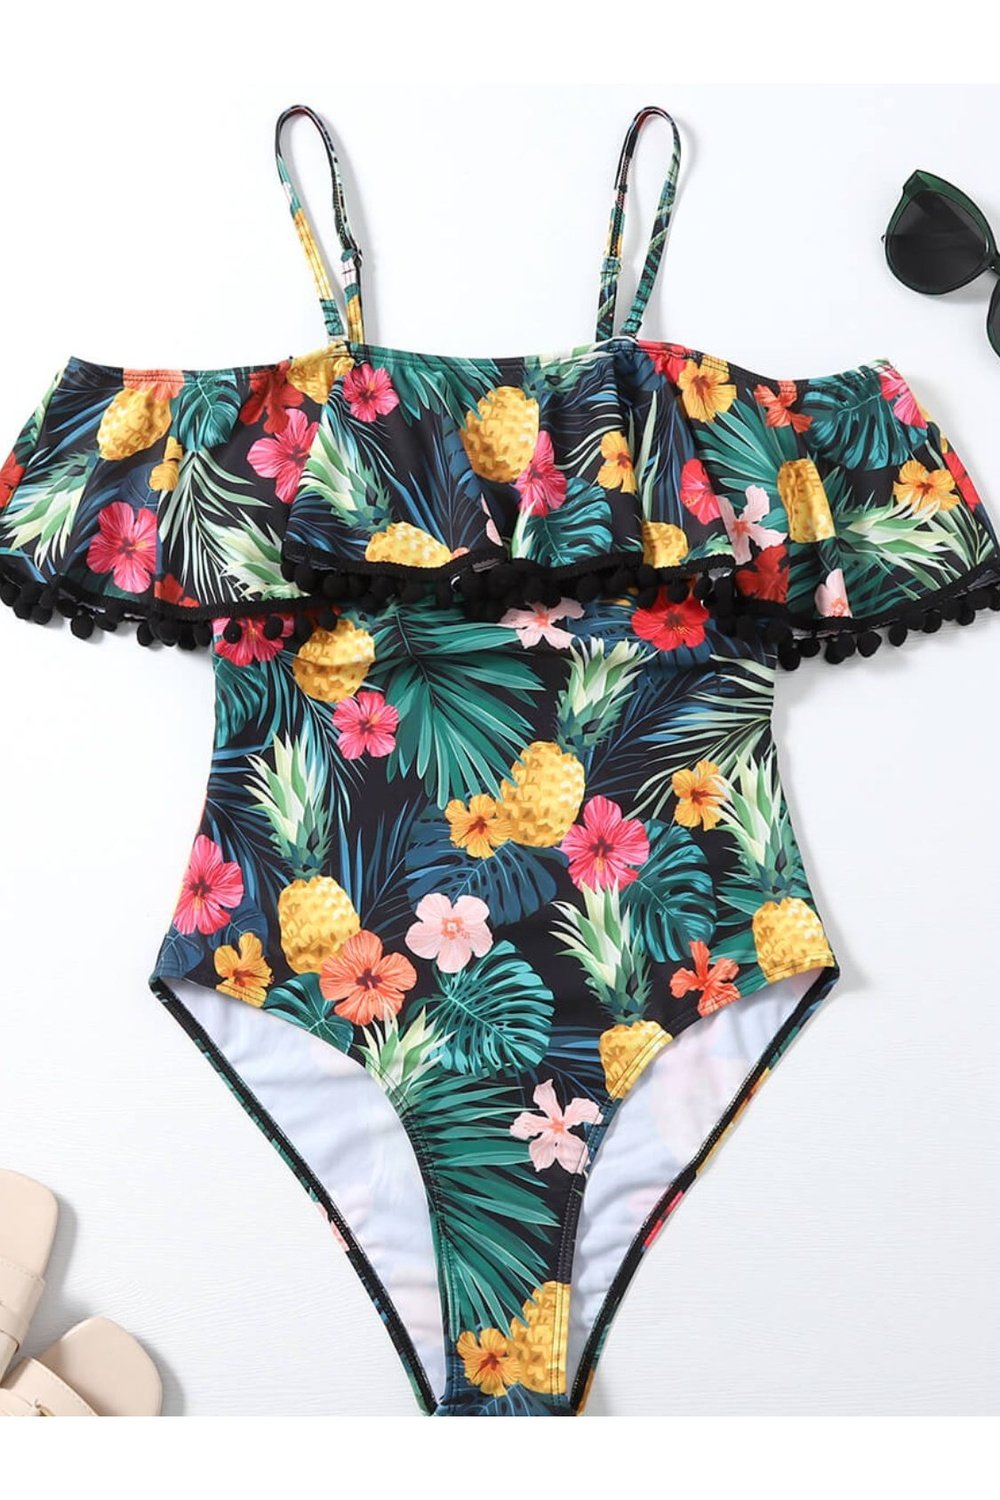 Botanical Print Cold-Shoulder One-Piece Swimsuit - Swimwear One-Pieces - FITGGINS